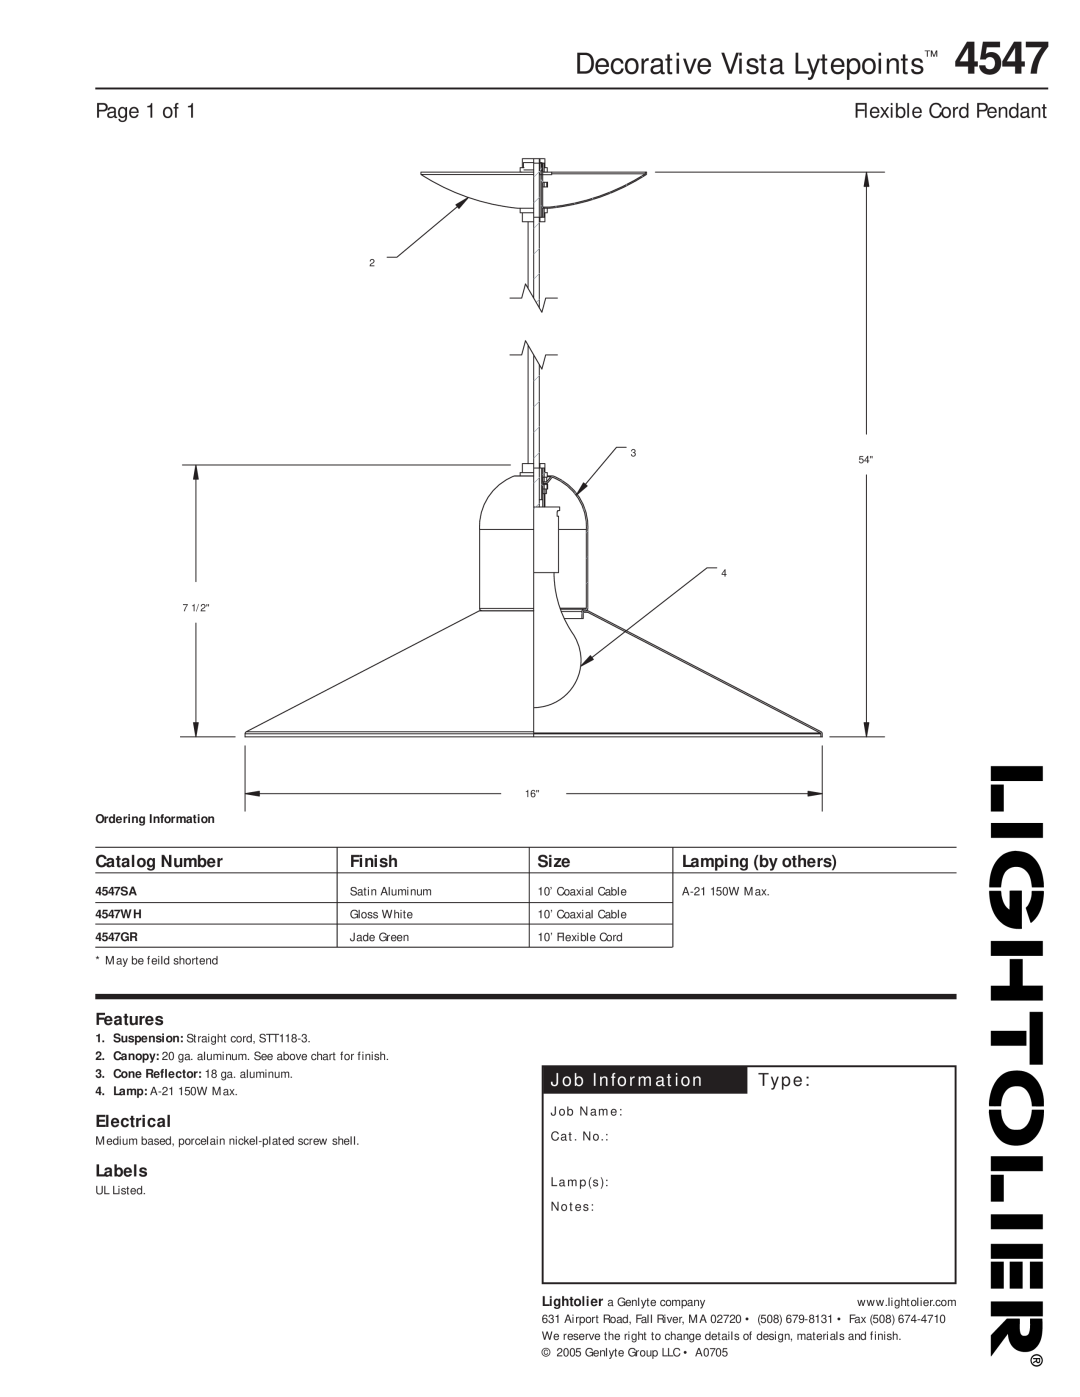 Lightolier 4547 manual Decorative Vista Lytepoints, Page 1 of, Flexible Cord Pendant, Catalog Number, Finish, Size, Labels 